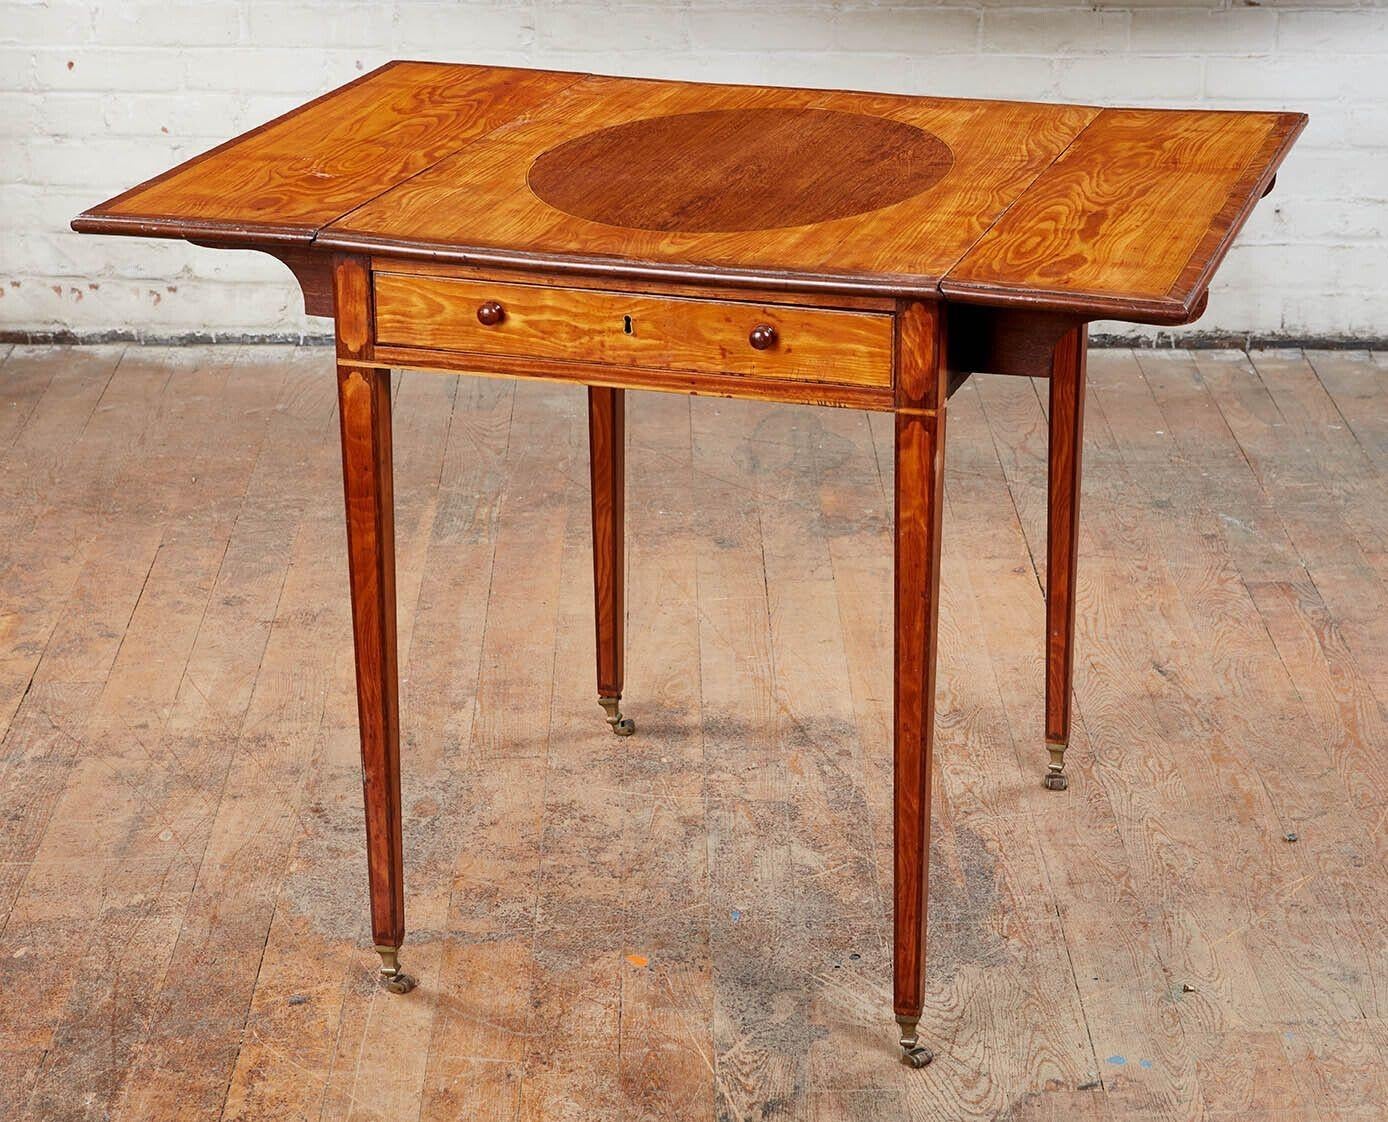 Very fine George III satinwood Pembroke table, the rectangular top with purpleheart oval center and cross banding, having two rectangular leaves similarly banded, over single divided drawer, standing on square tapered legs with inlaid panels,